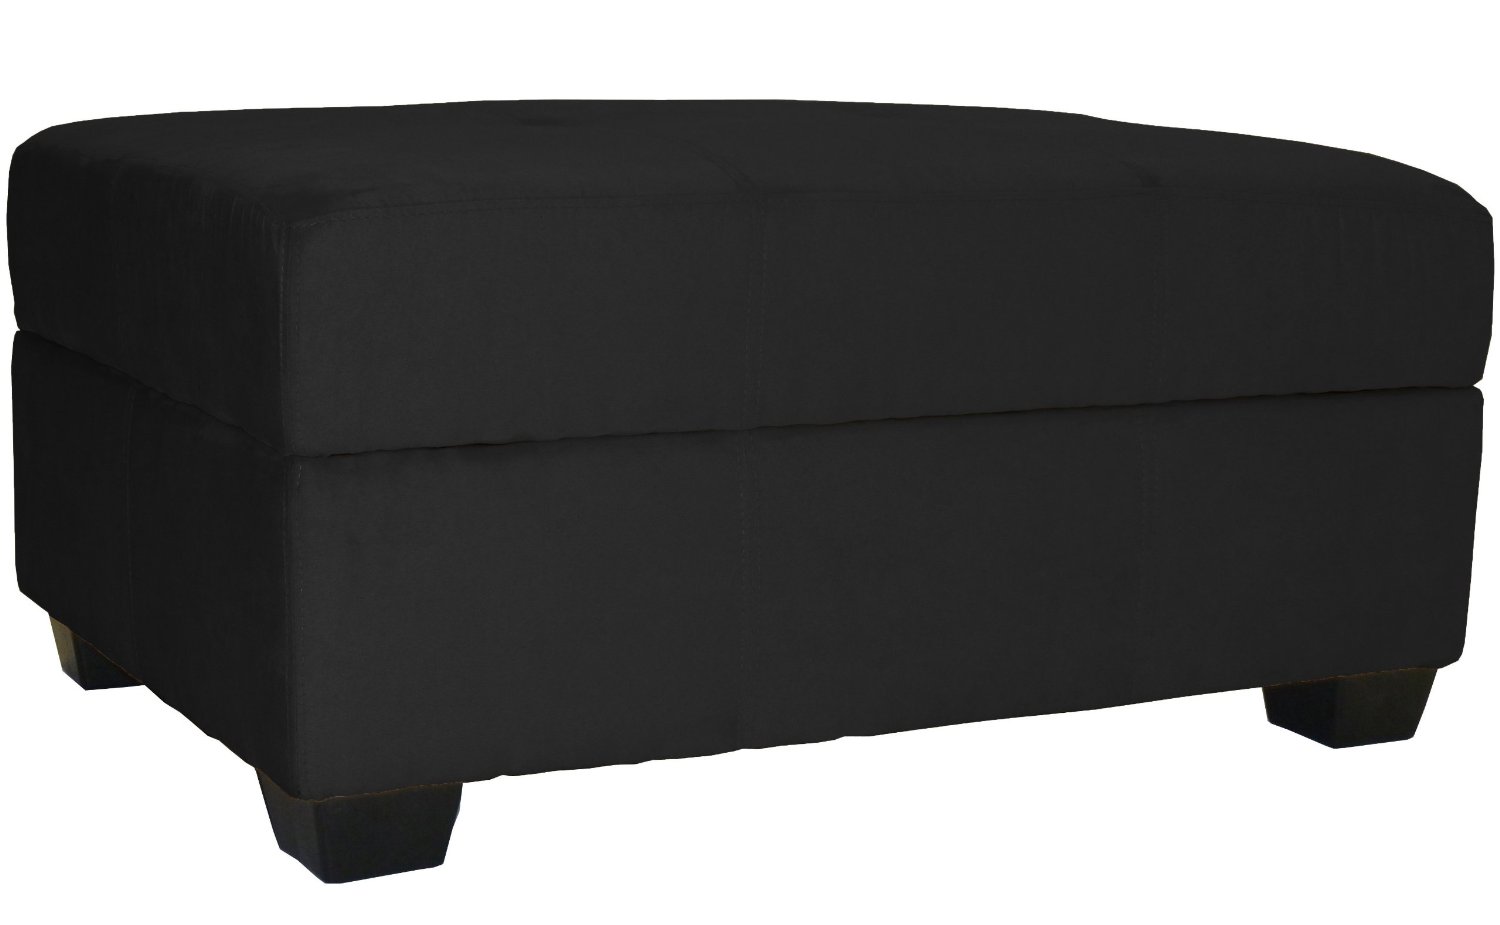 Epic Furnishings 36 by 24 by 18-Inch Storage Ottoman Bench